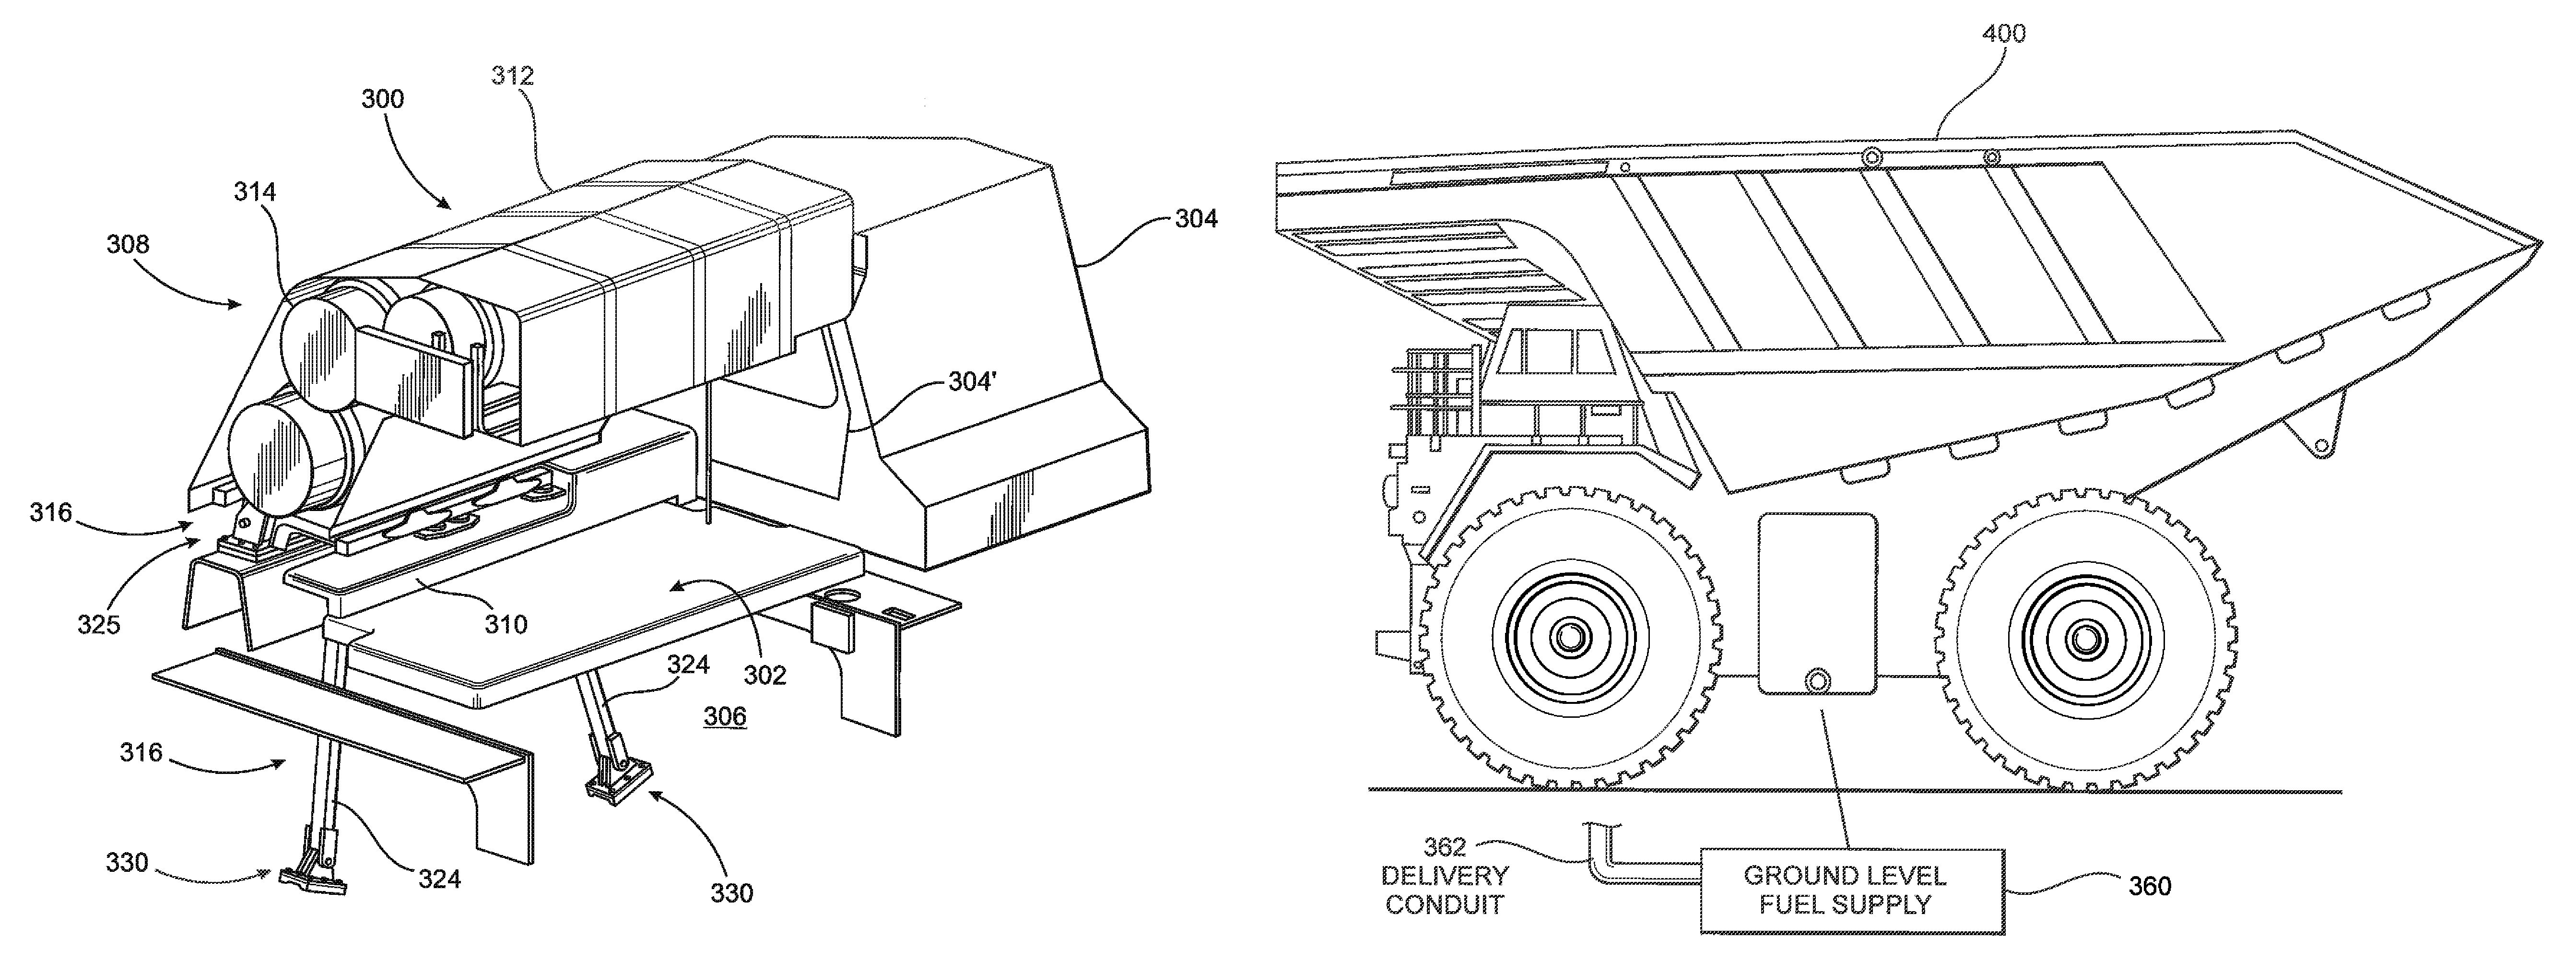 Modification of an industrial vehicle to include a containment area and mounting assembly for an alternate fuel